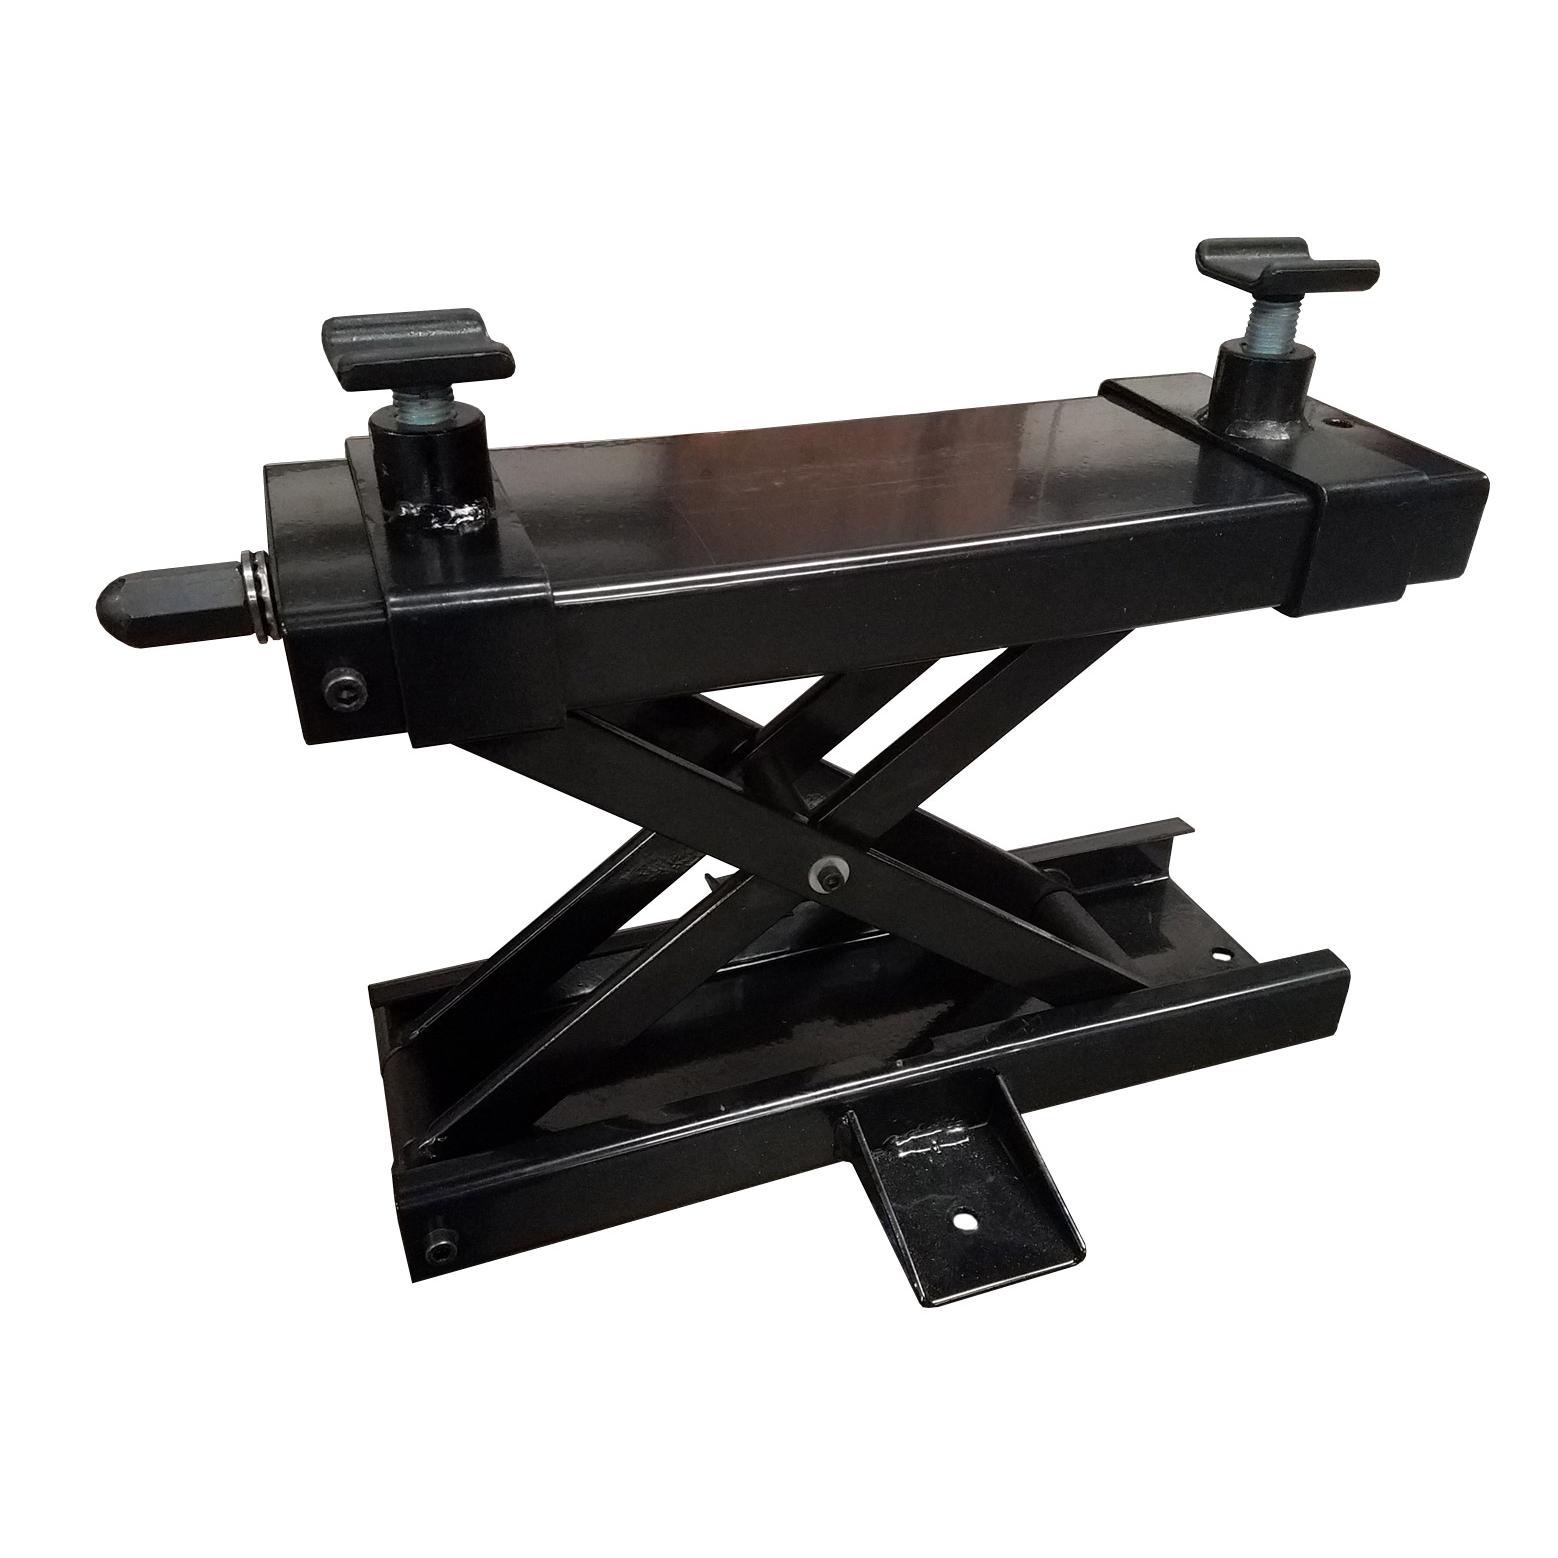 Motorcycle Jack, Motorcycle Table Jack for Sale